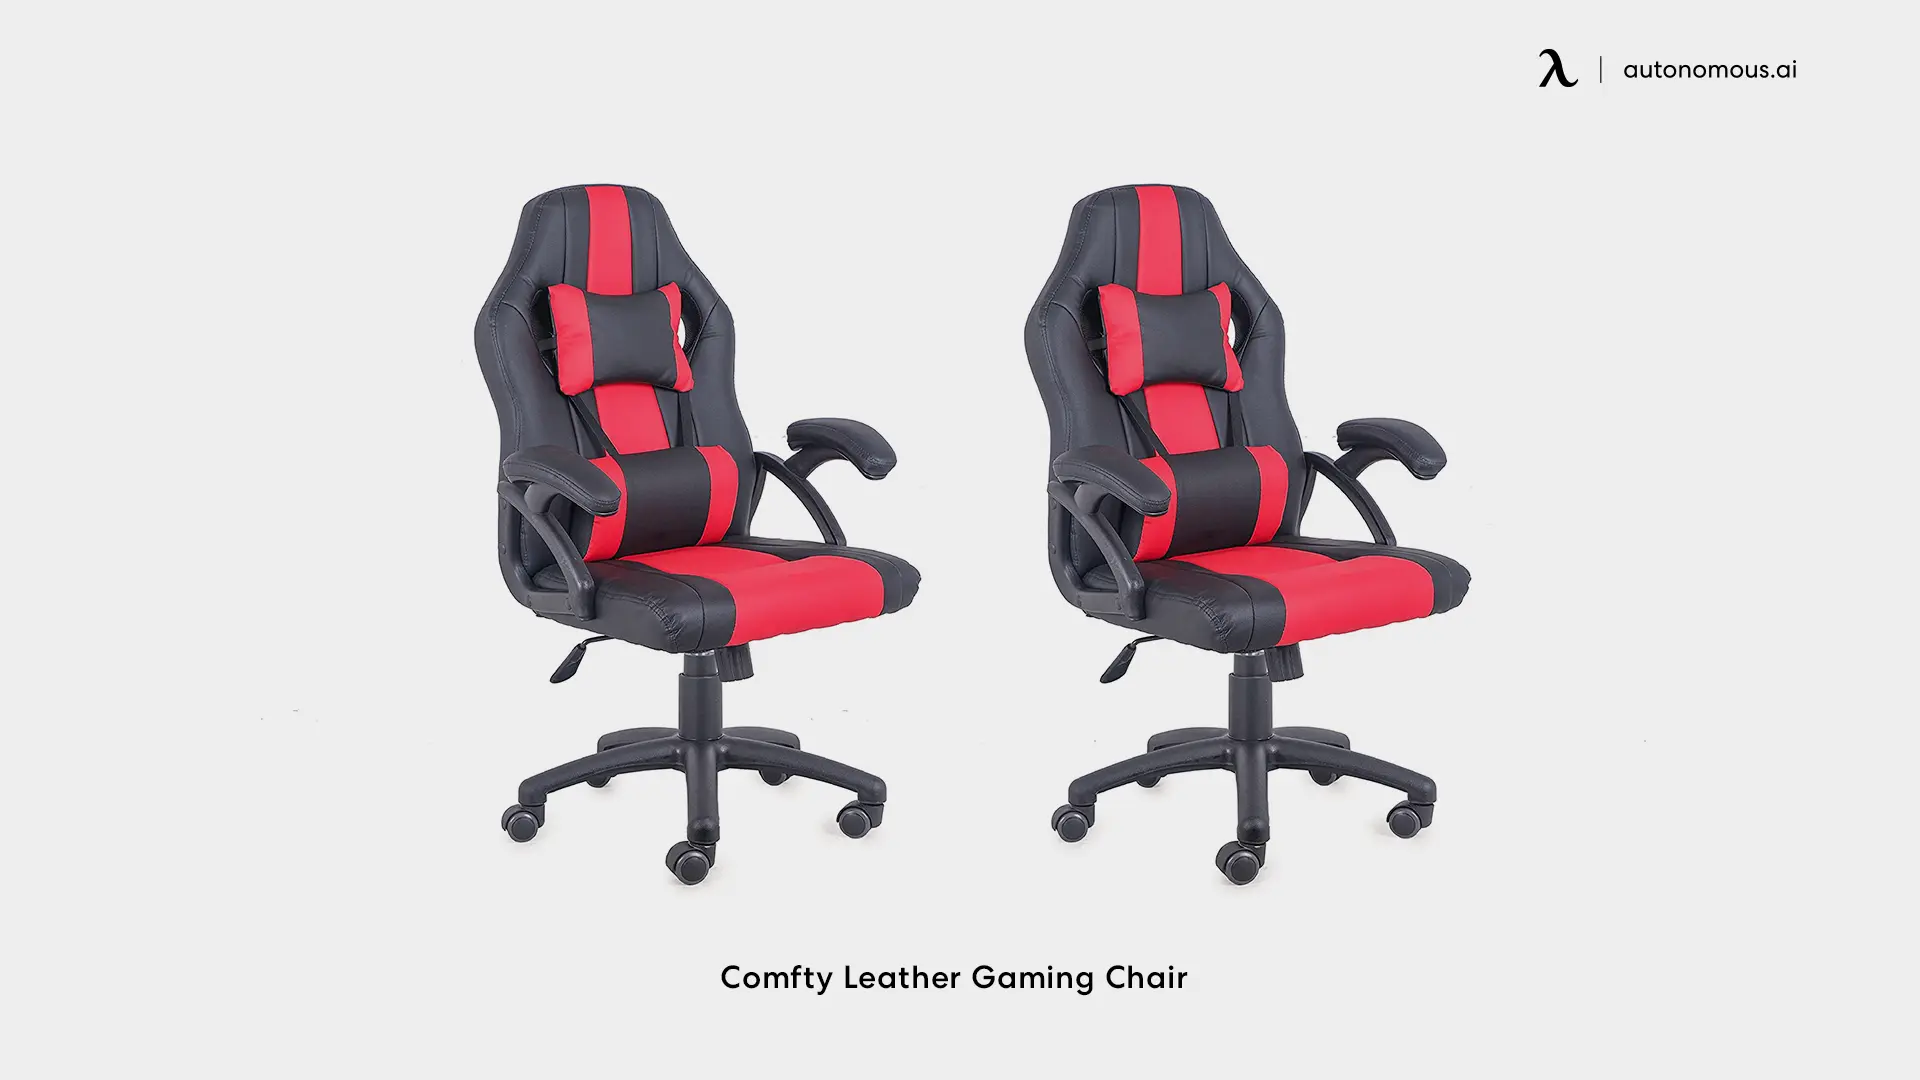 Comfty Leather Gaming Chair